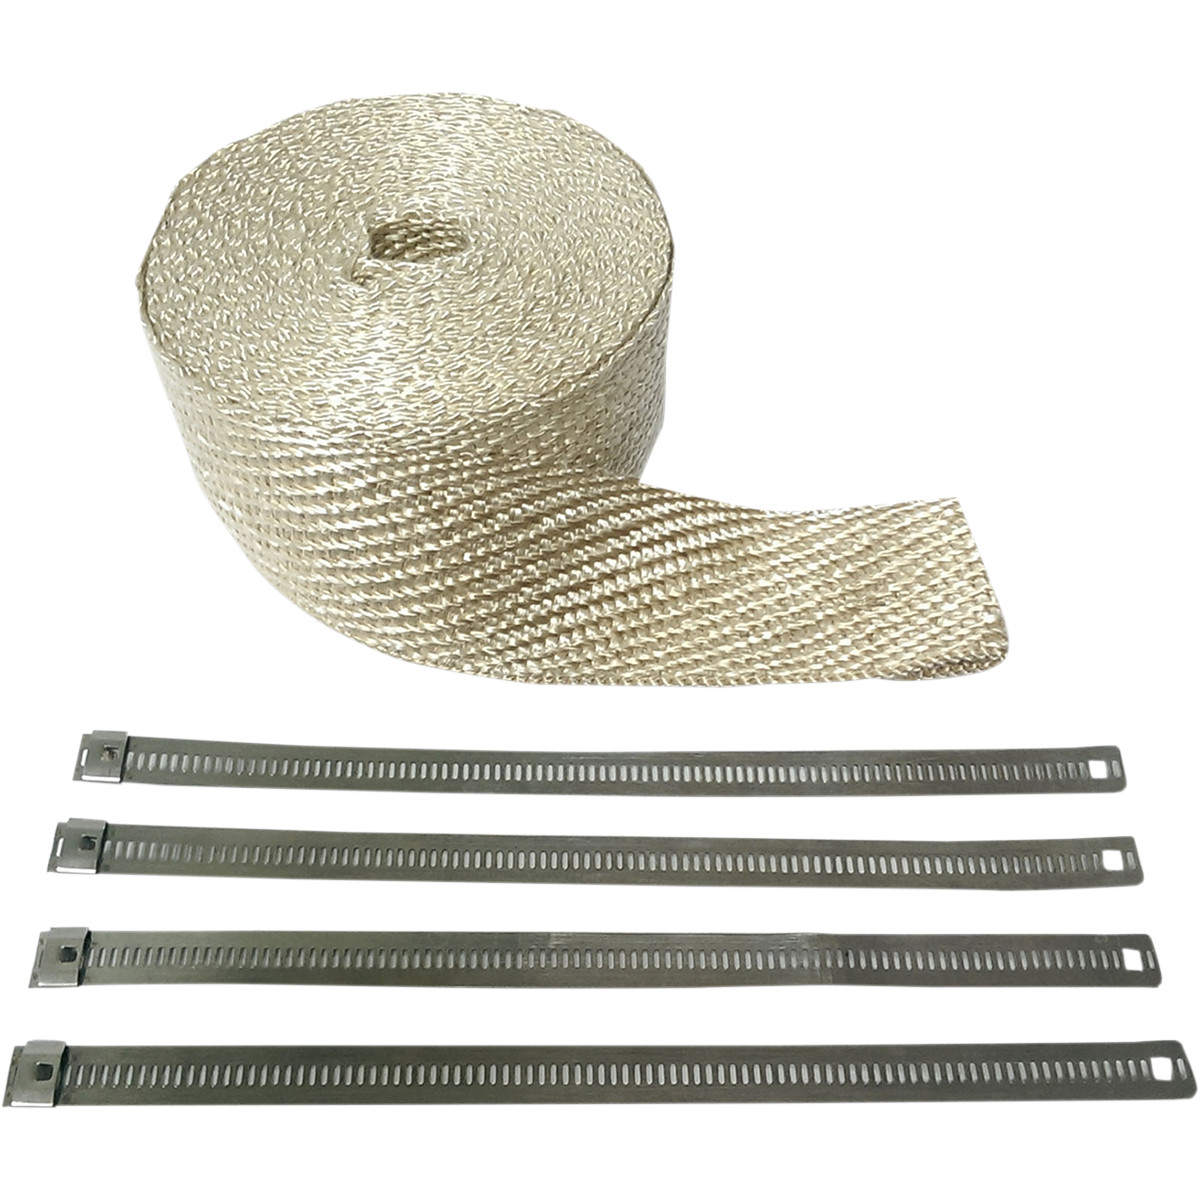 H/D CYCLE EXHAUST PIPE WRAP NATURAL W/ STAINLESS STEEL